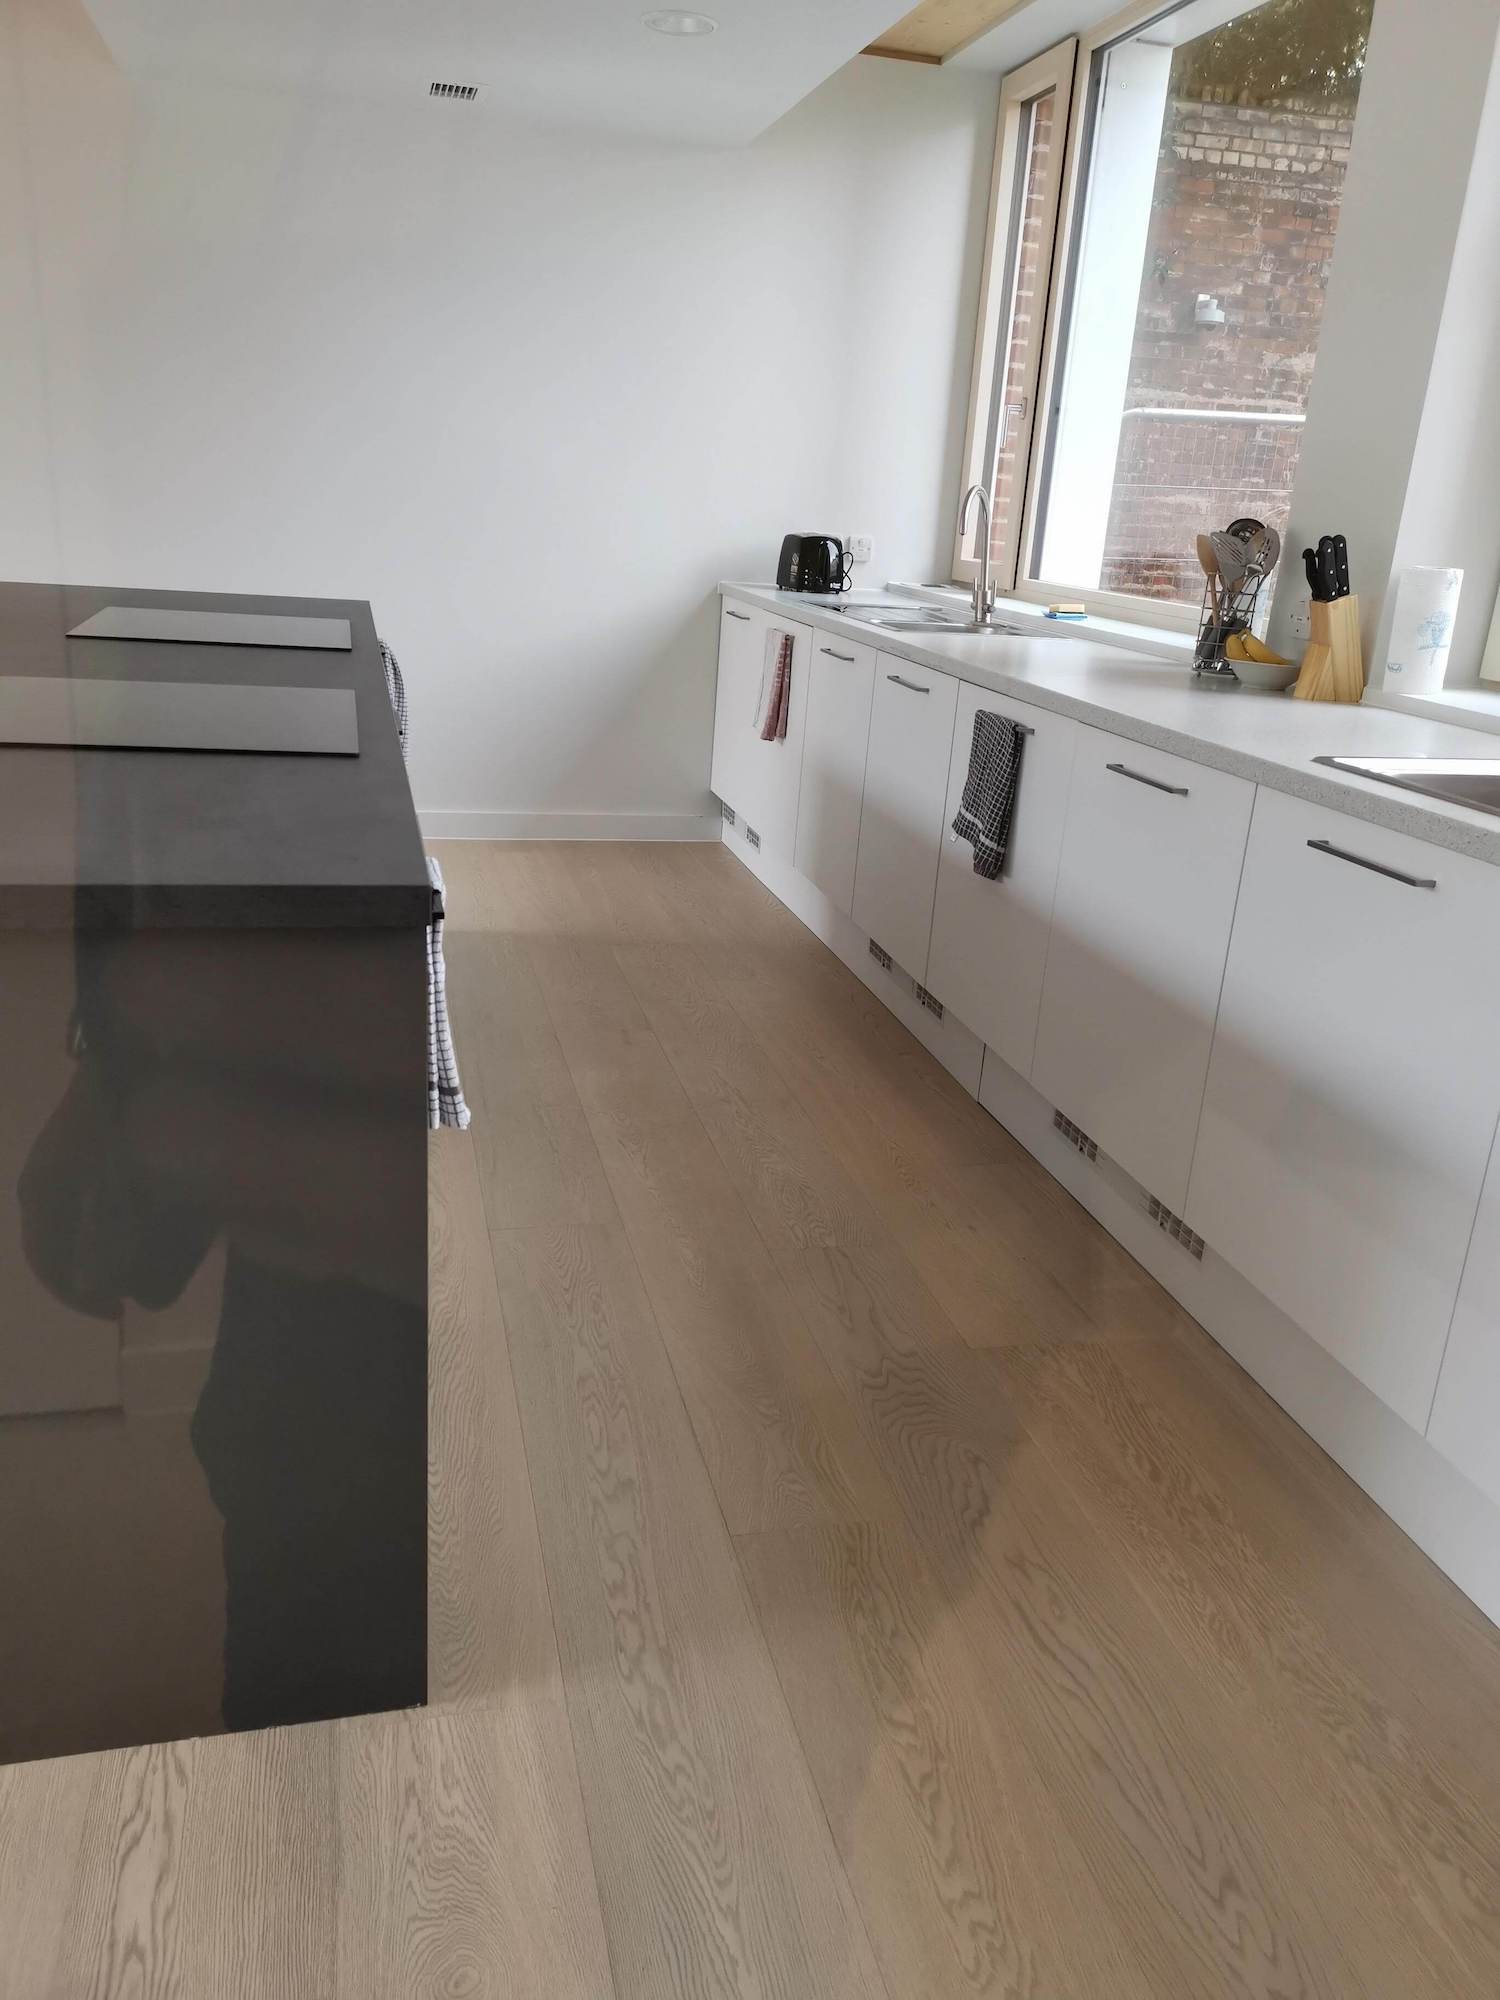 The Solid Wood Flooring Company supply their white lacquered board to Kings College accommodation